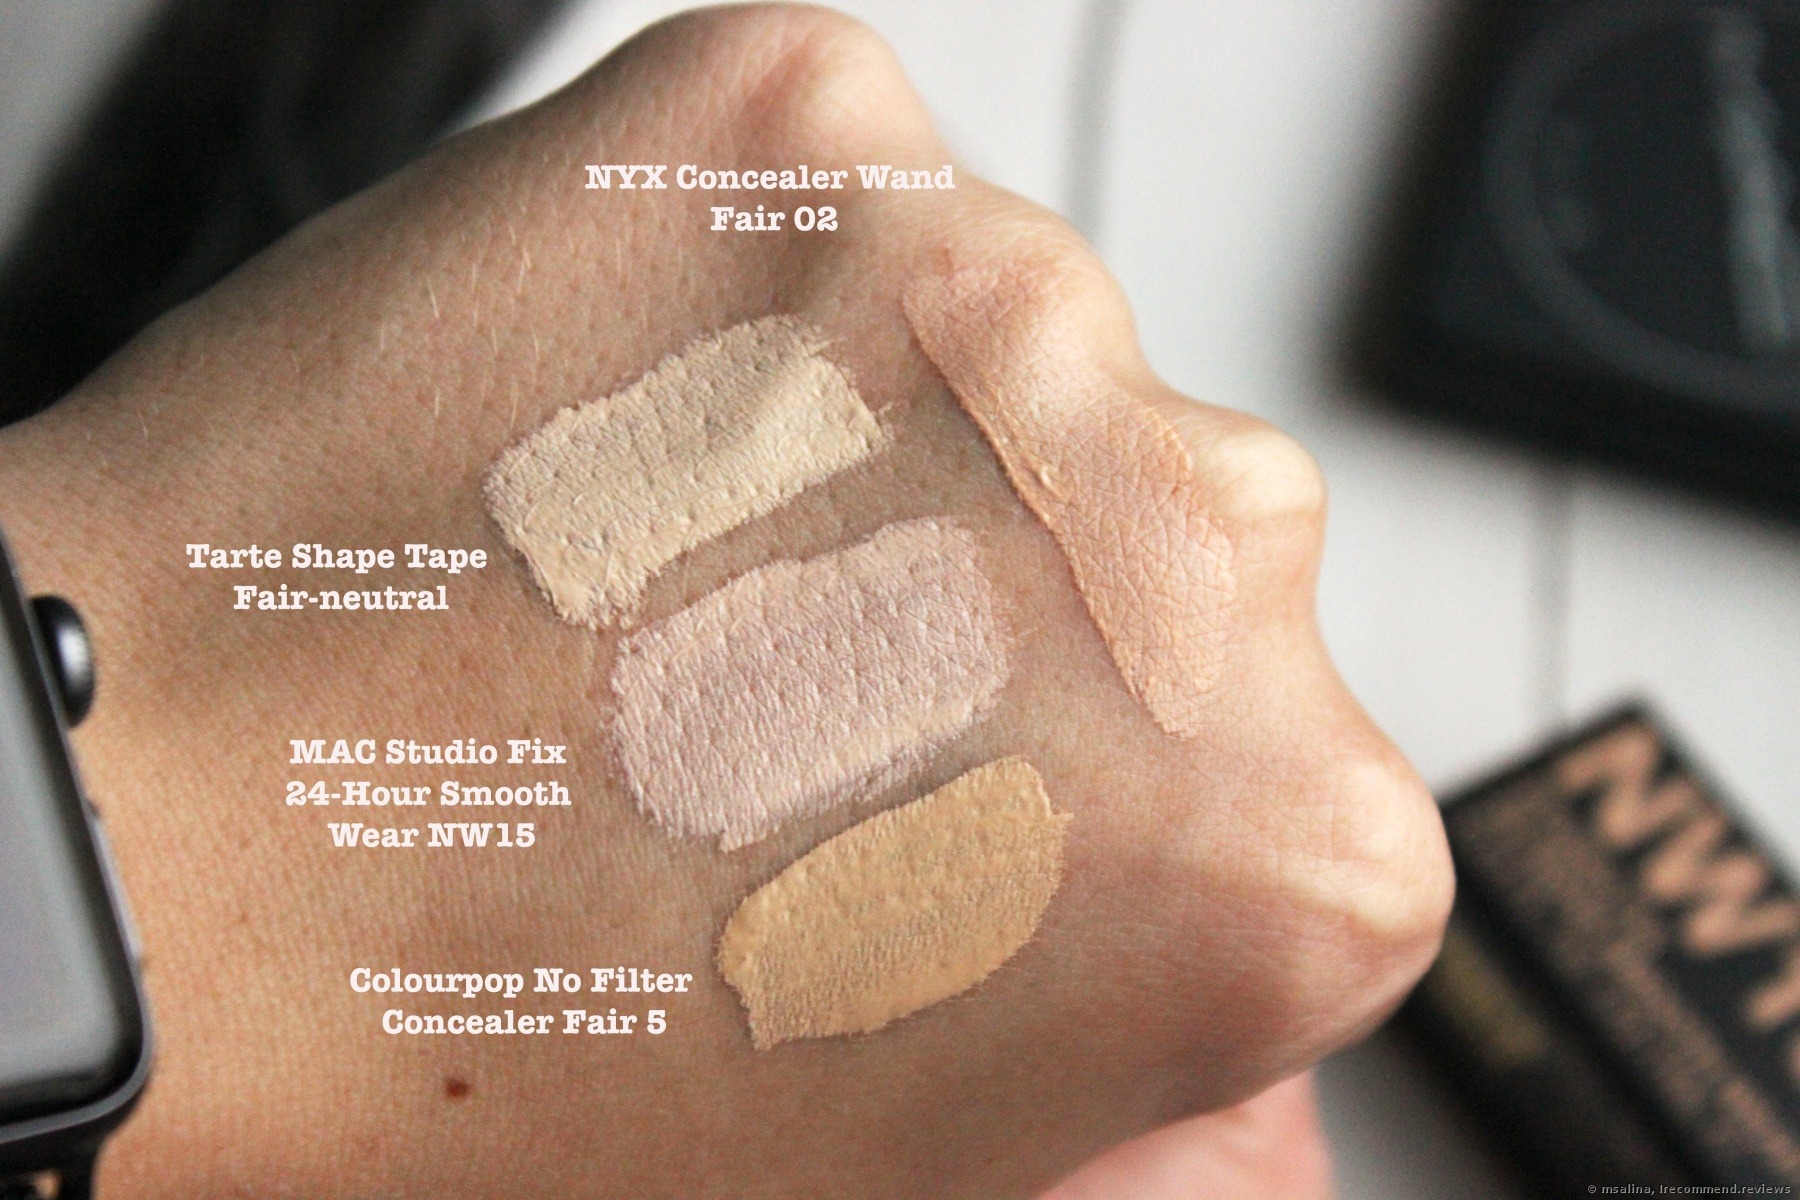 MAC Studio Fix 24-Hour Smooth Wear Concealer - «Dark circles effacing,  highlighting and staying power - all the deets about the new concealer from  MAC. My comparison with the Tarte Shape Tape